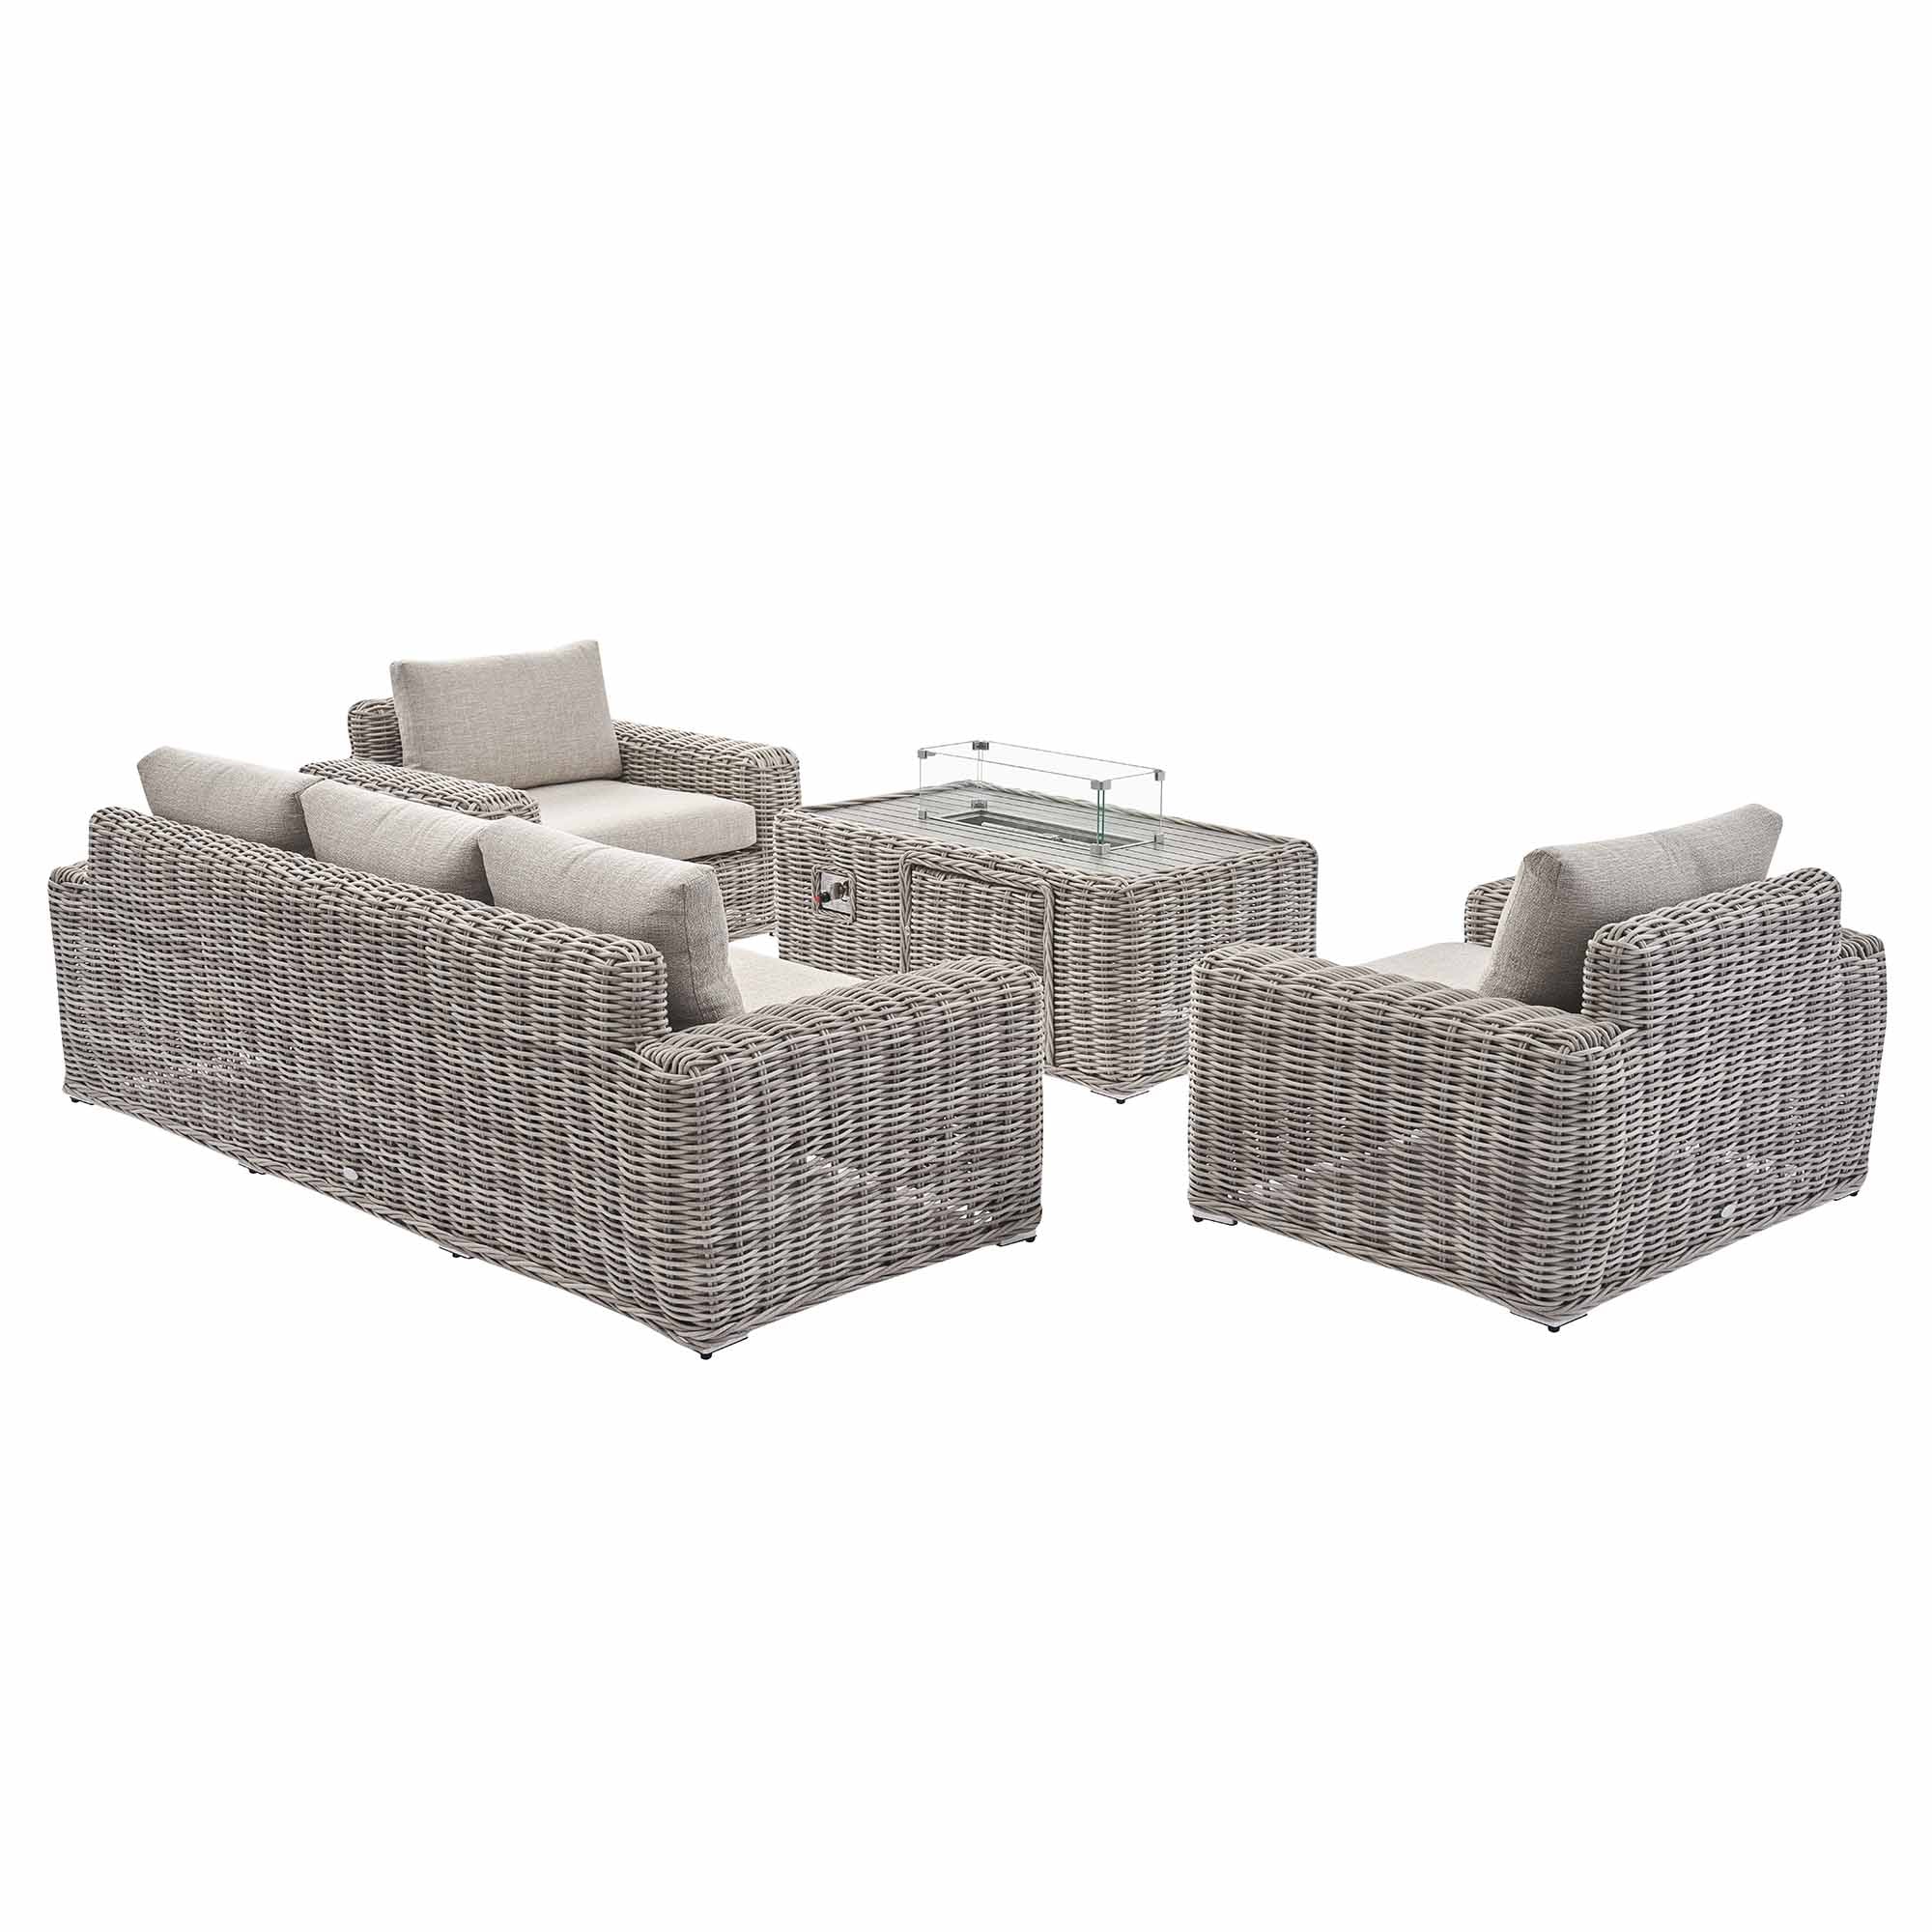 Bellagio Round Wicker Sofa Set with Firepit Coffee Table, Light Grey